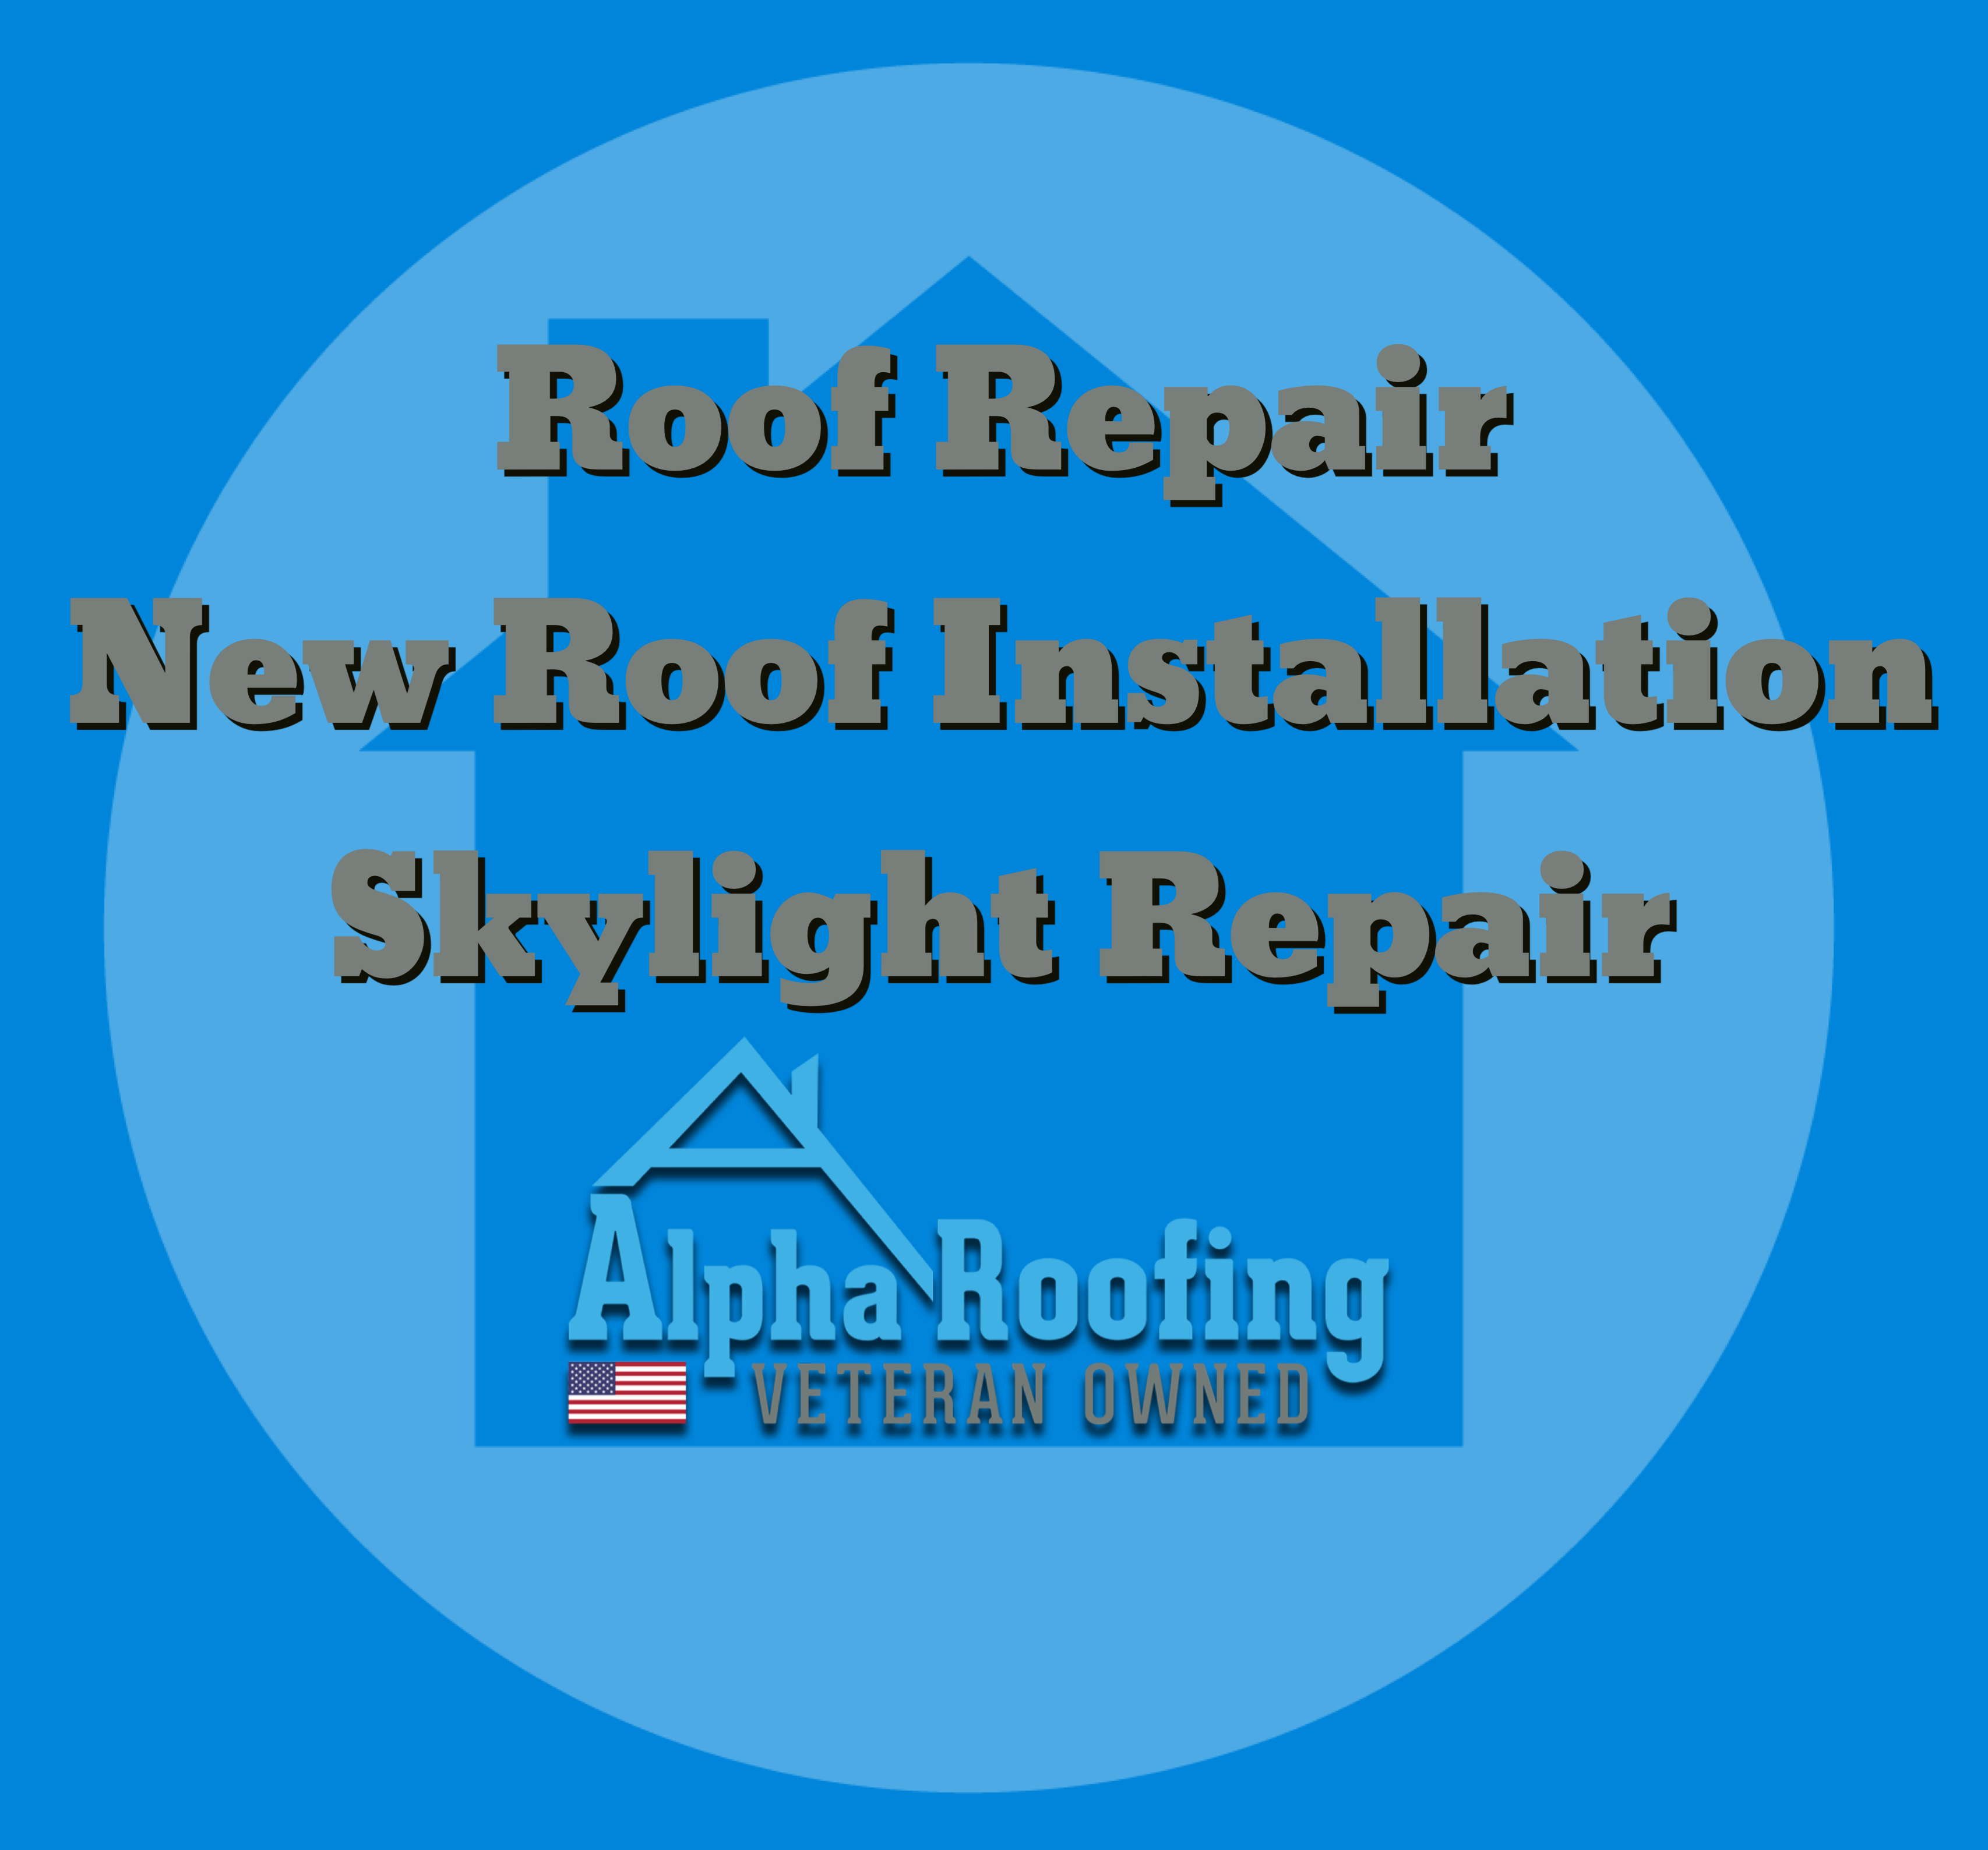 Repairs and installation icon for Alpha Roofing